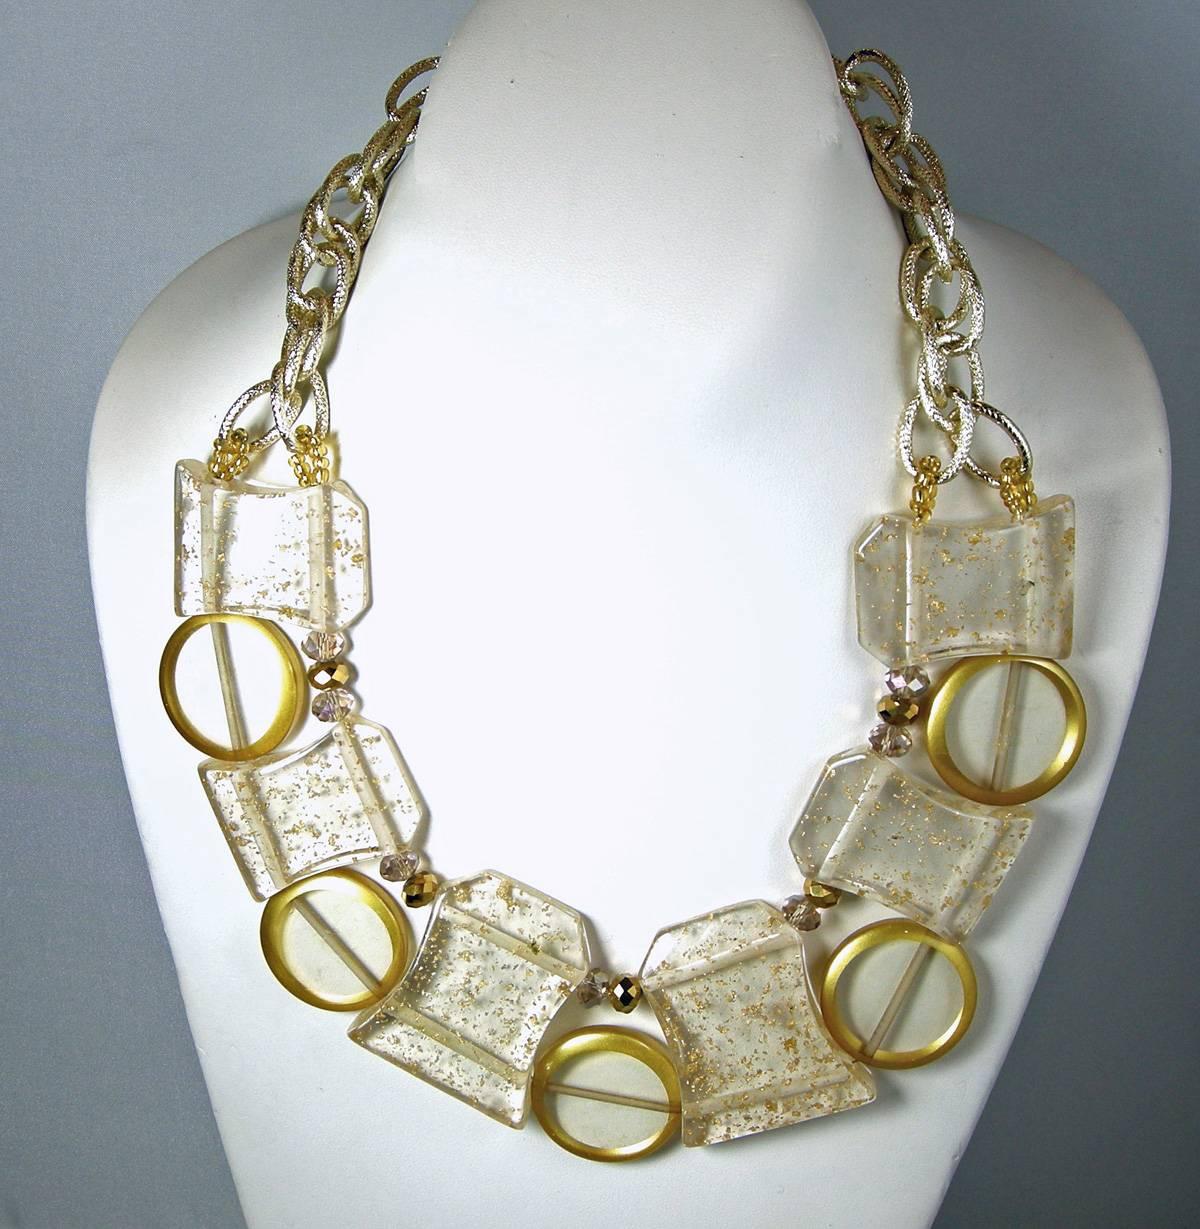 This beautiful 1950s Lucite necklace has huge Lucite spheres with golden flakes that graduate in size to the center. It has round Lucite circles in between each sphere.  It is 21” long with an open link chain that leads up to a lobster clasp.  The